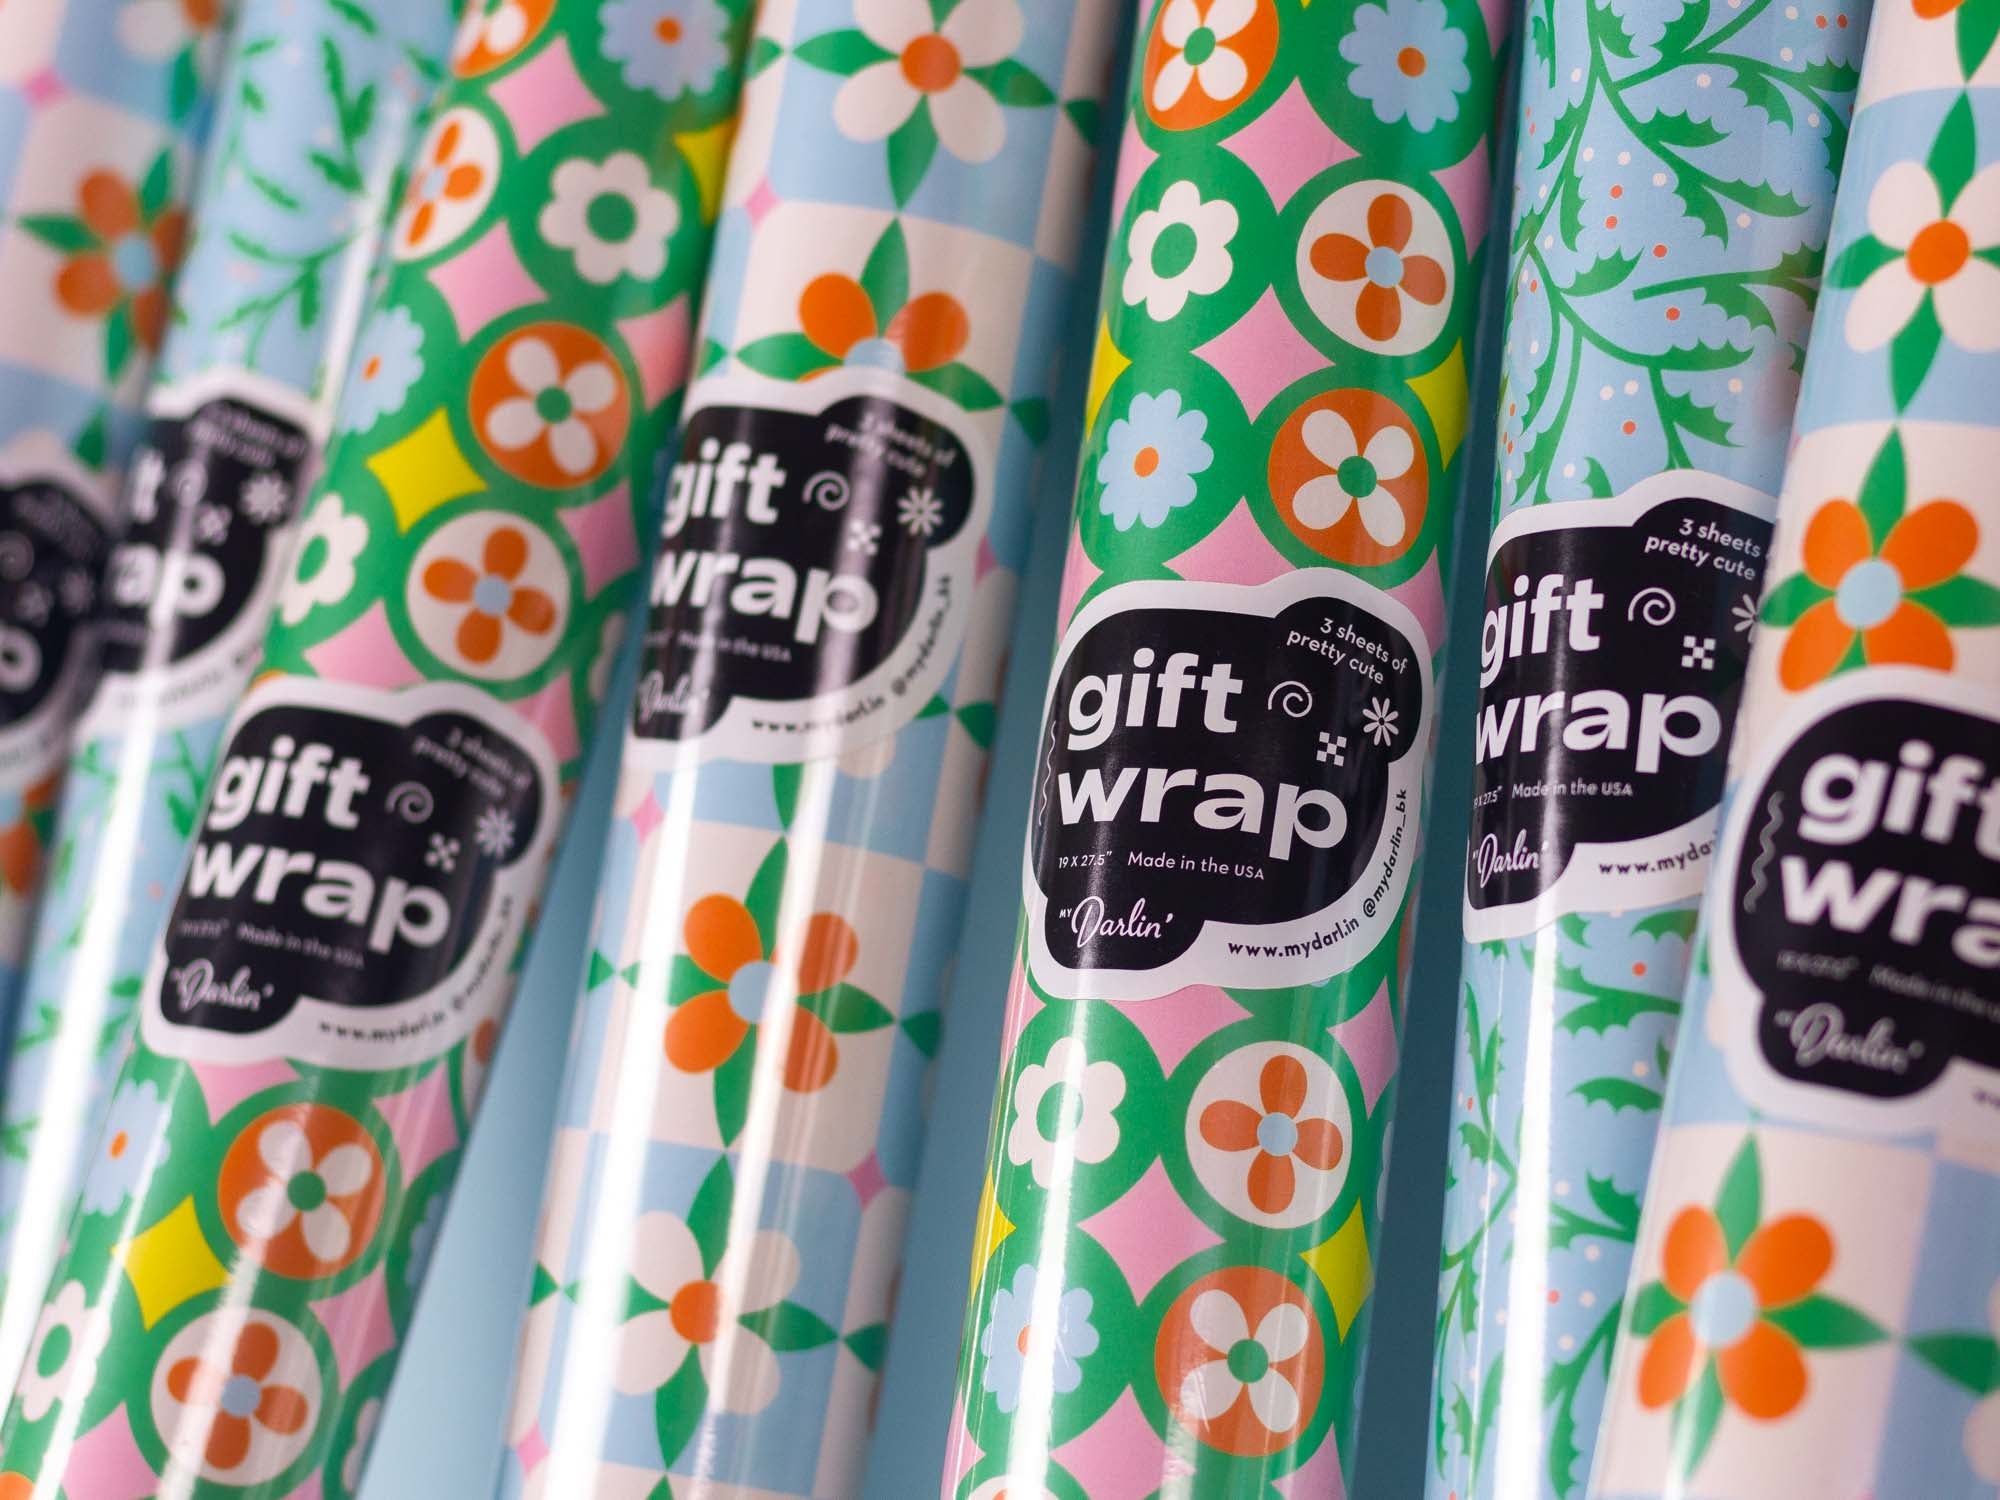 3 sheets of pretty cute gift wrap sticker detail on rolls of retro floral holiday gift wrap. By @mydarlin_bk Made in the USA